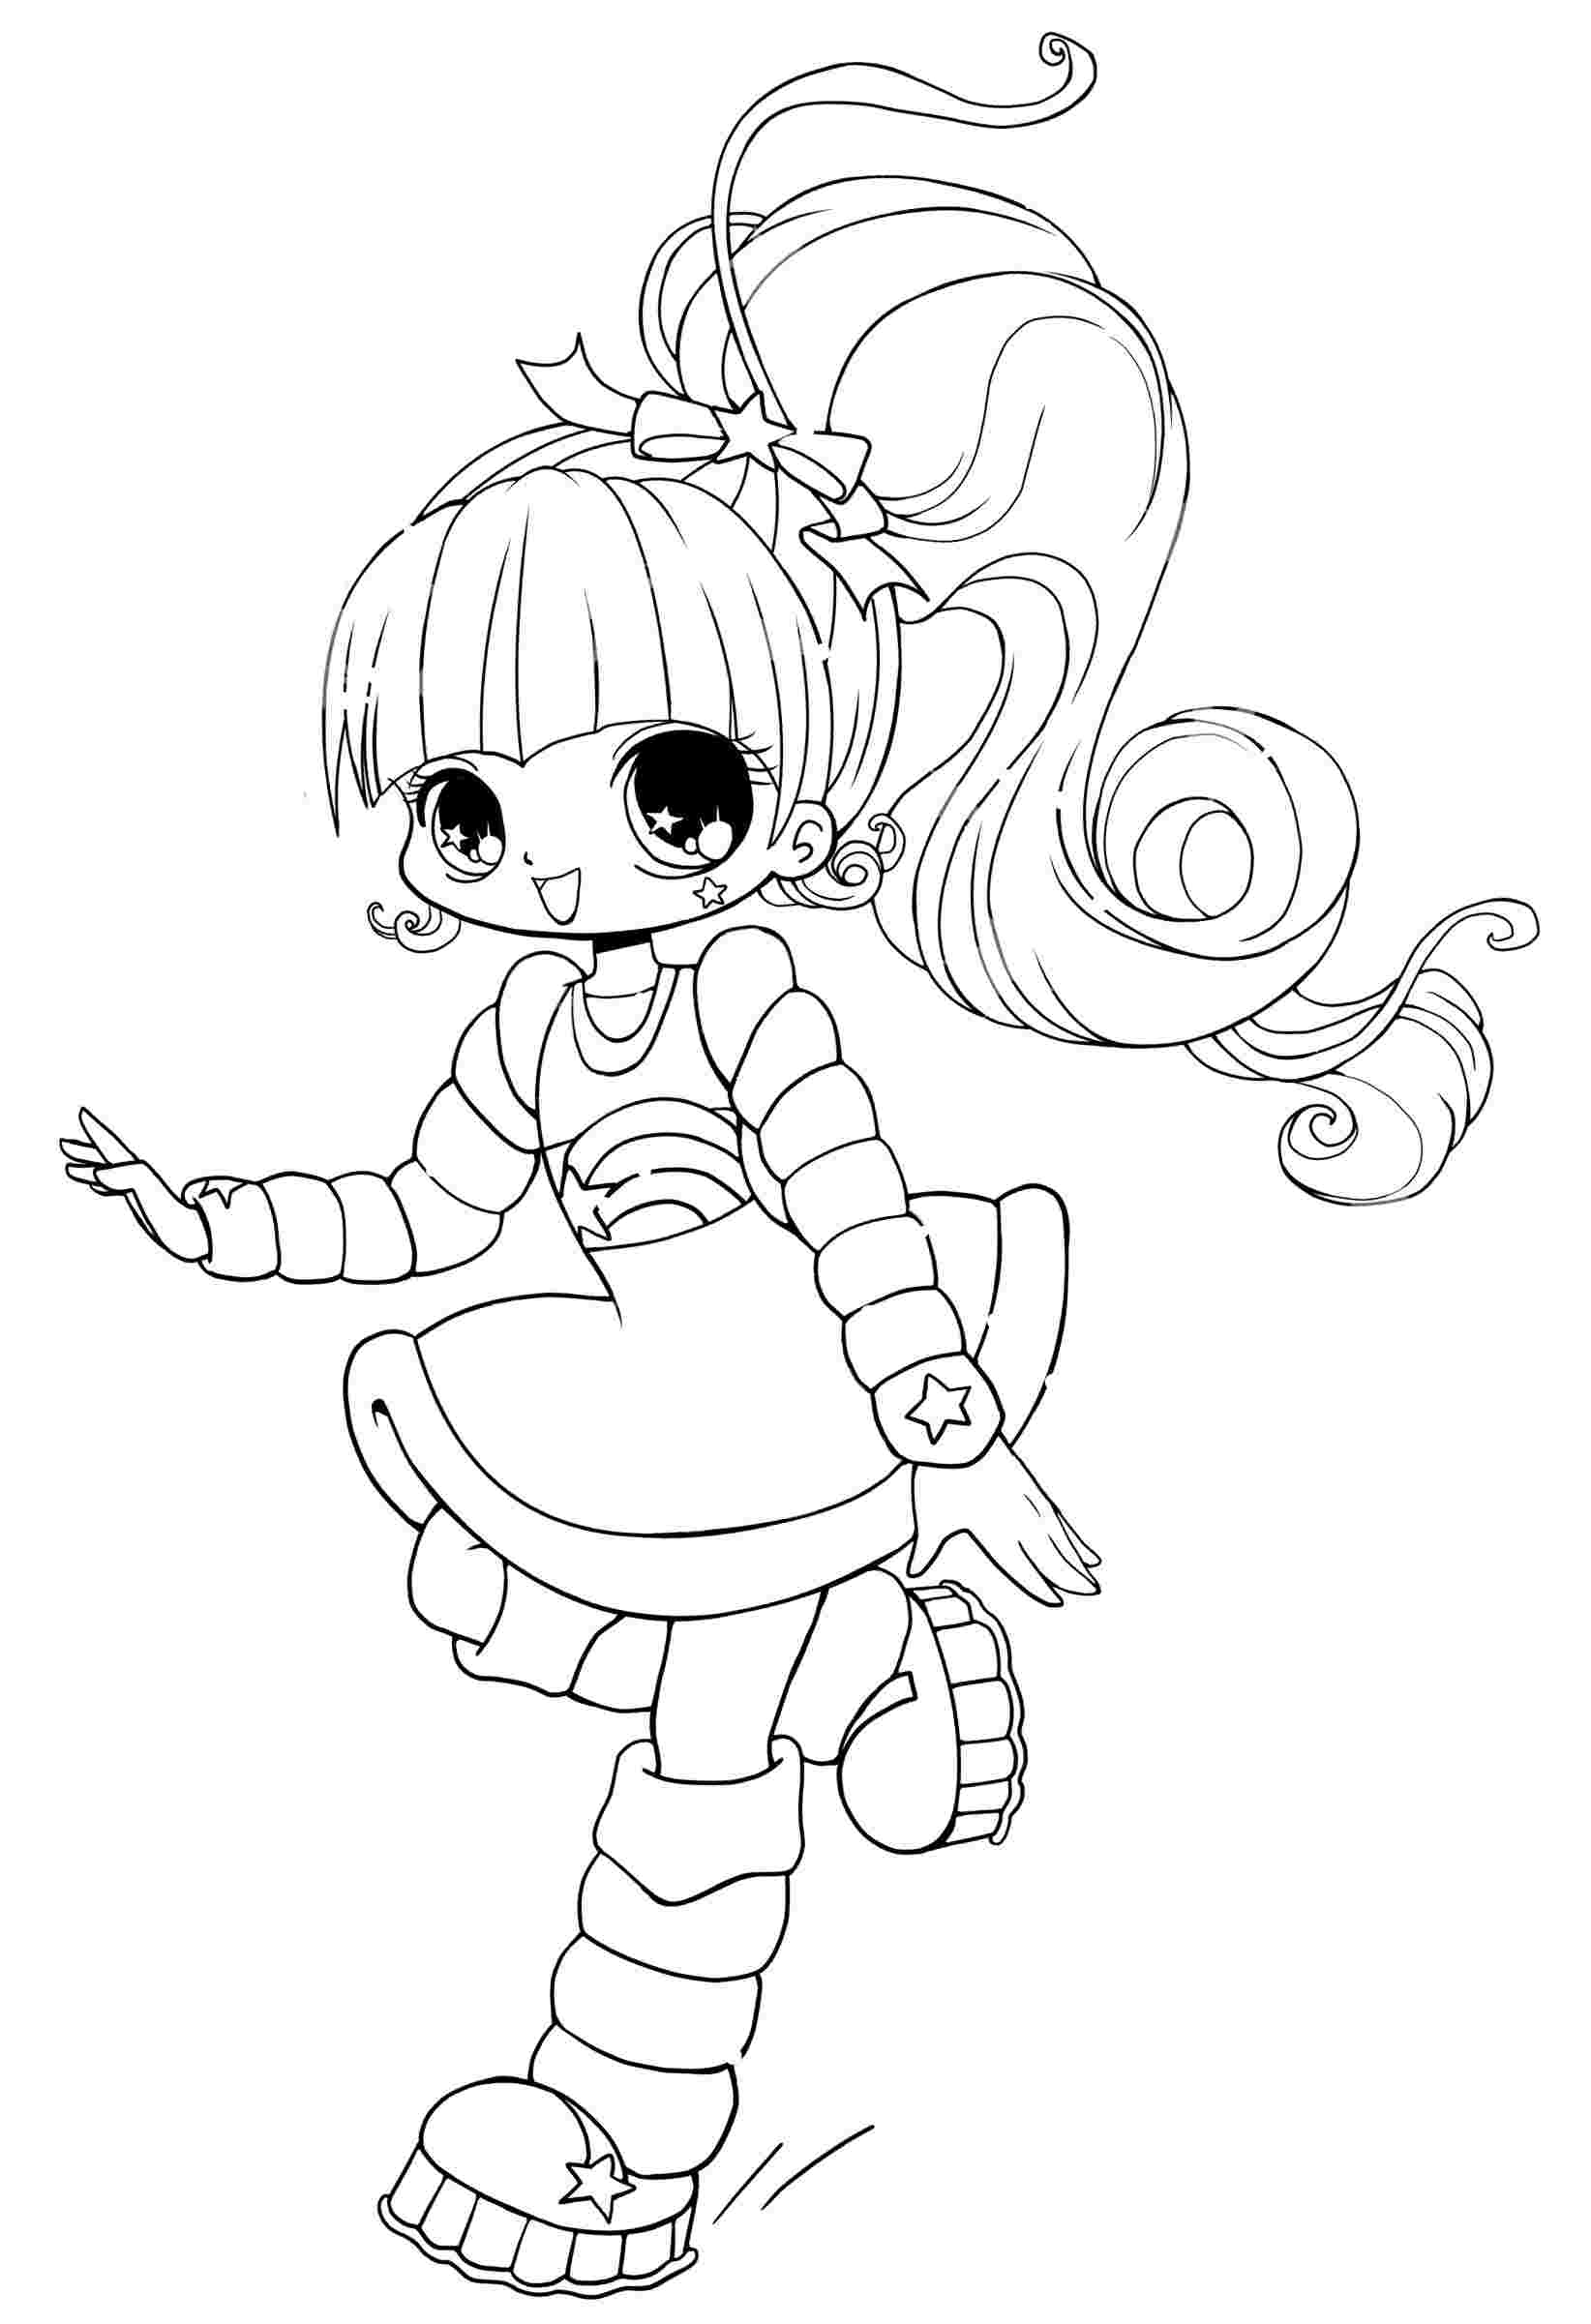 Chibi Girl 38 For Kids Coloring Page